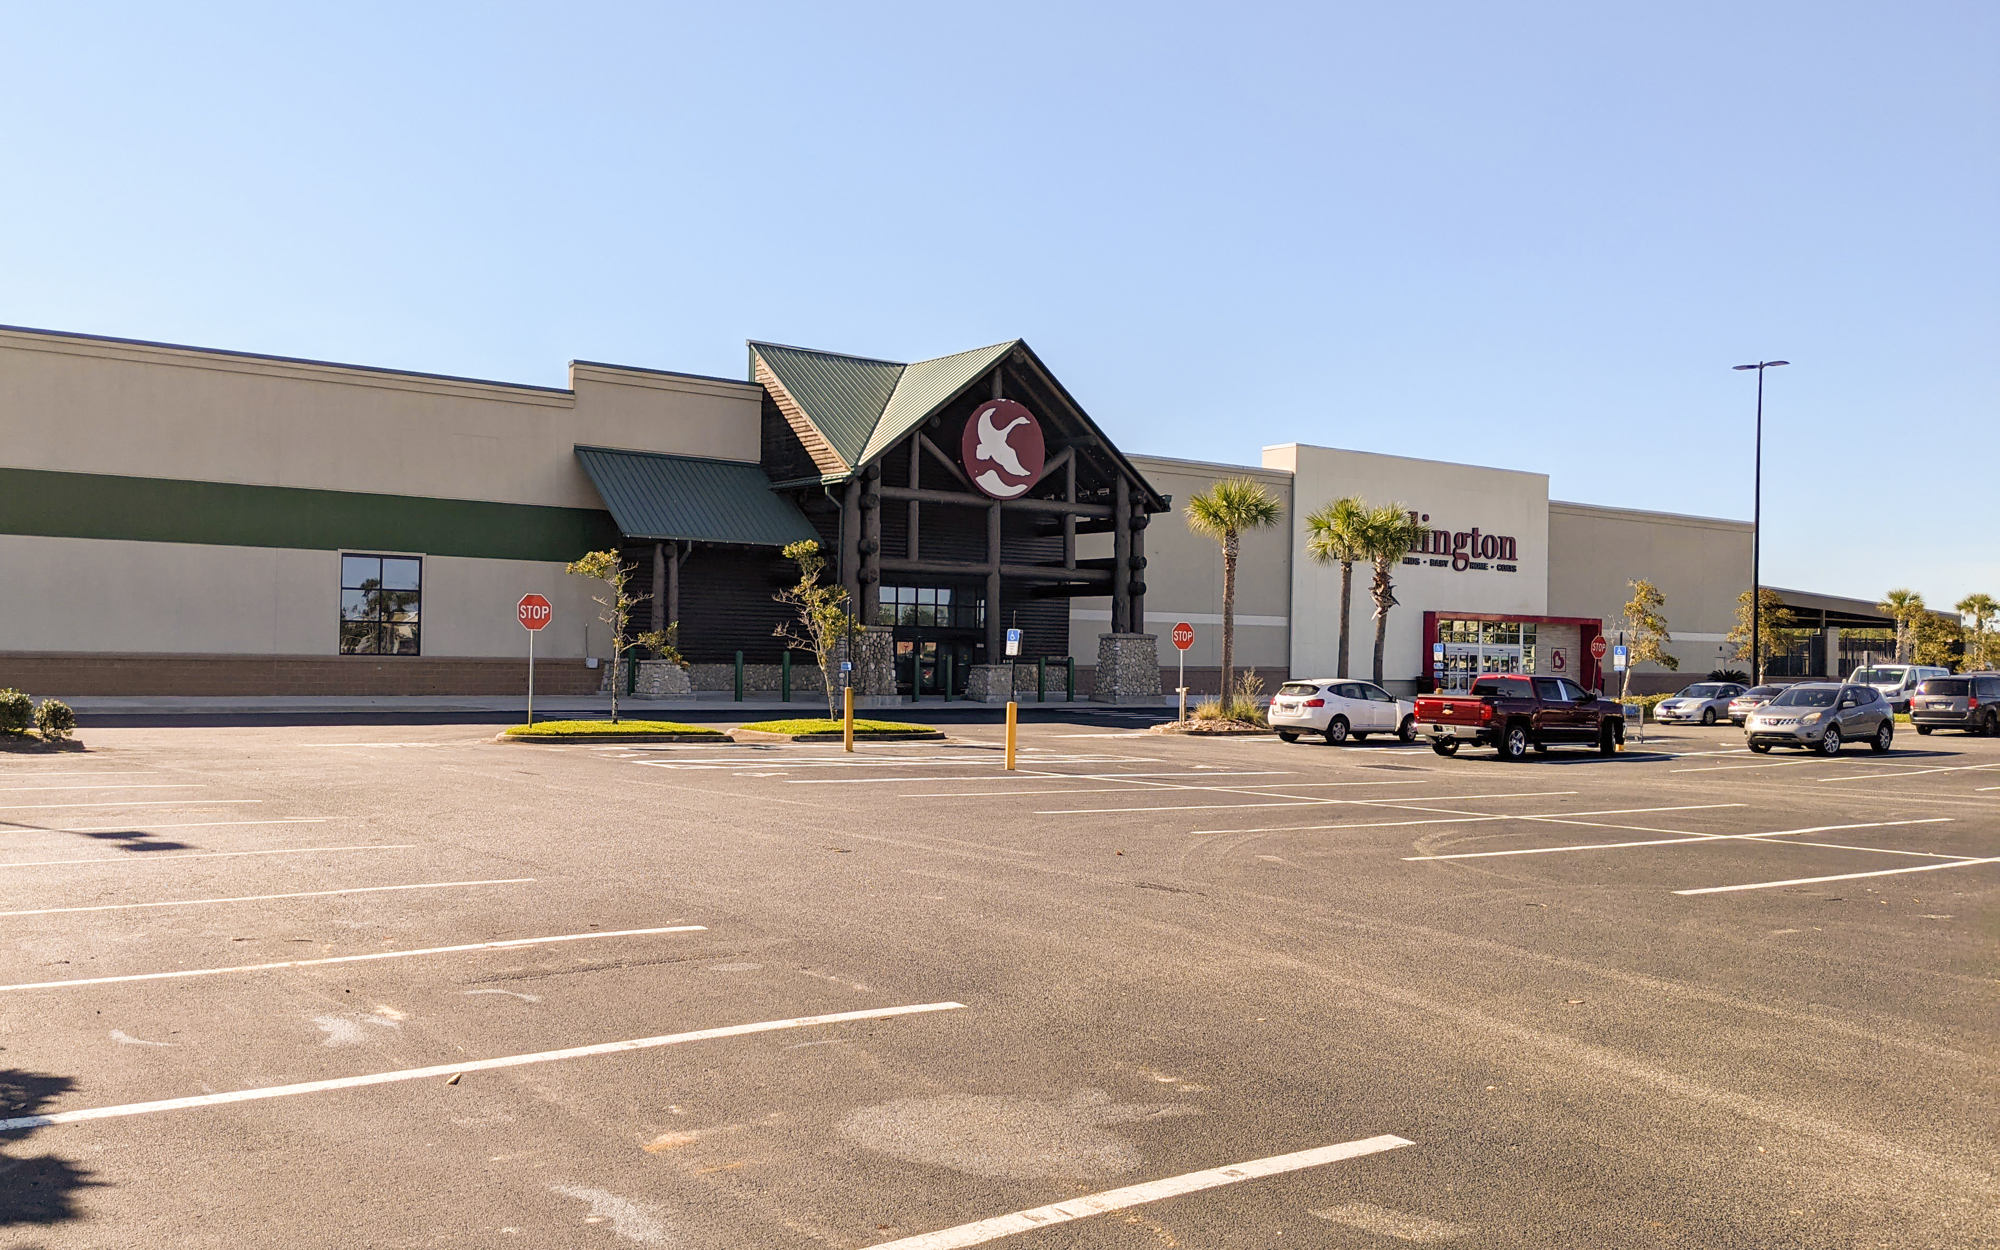 Sportsman's Warehouse is taking part of the closed Gander Mountain space.